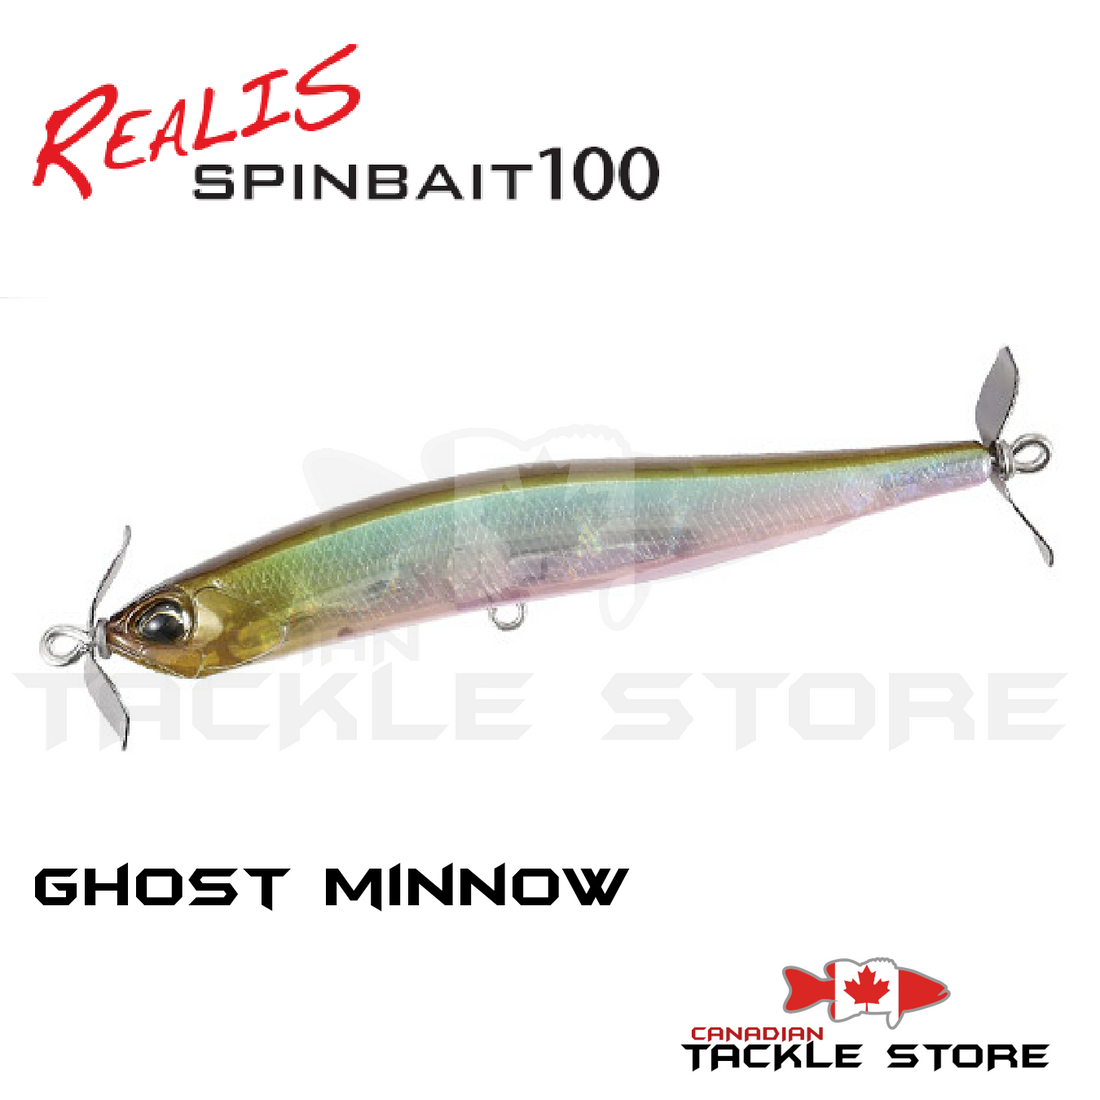 DUO Realis Spybait 100 – Canadian Tackle Store